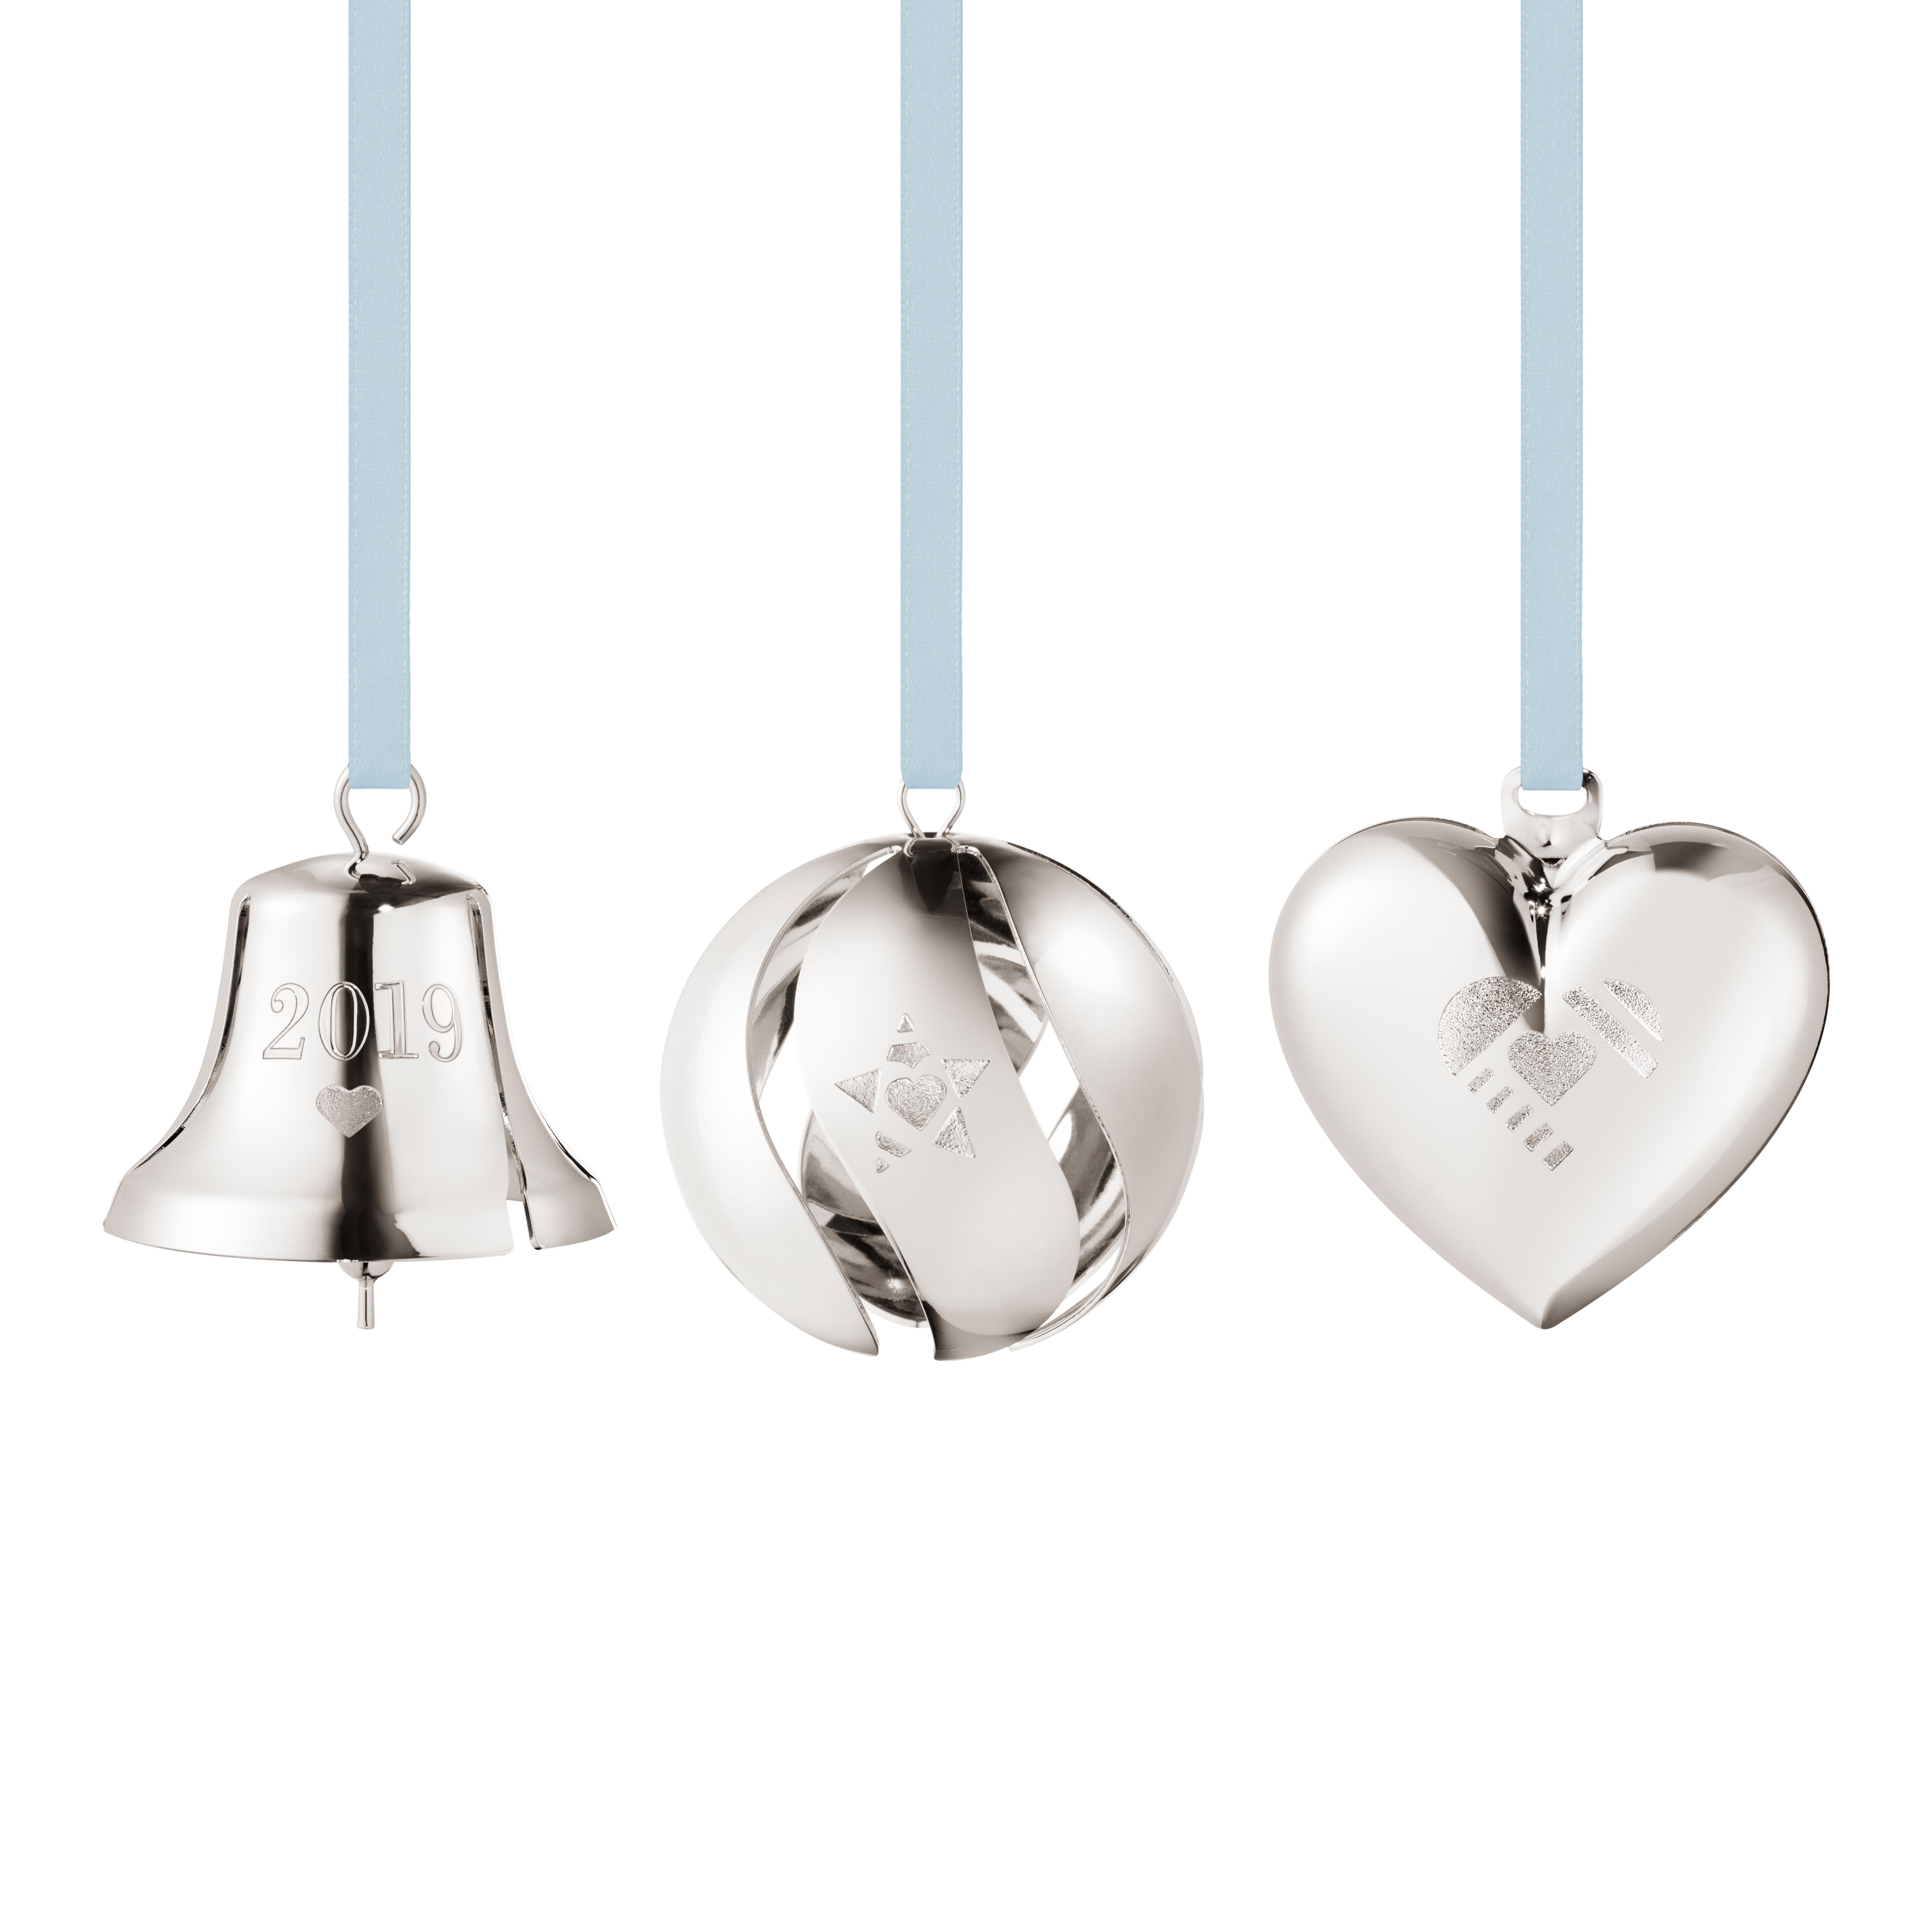 Unpacking the Christmas decorations and dressing the tree is one of the season’s most cherished rituals. Add to a loved one’s collection of ornaments with this Georg Jensen Christmas collectibles gift set and forever be part of this most special